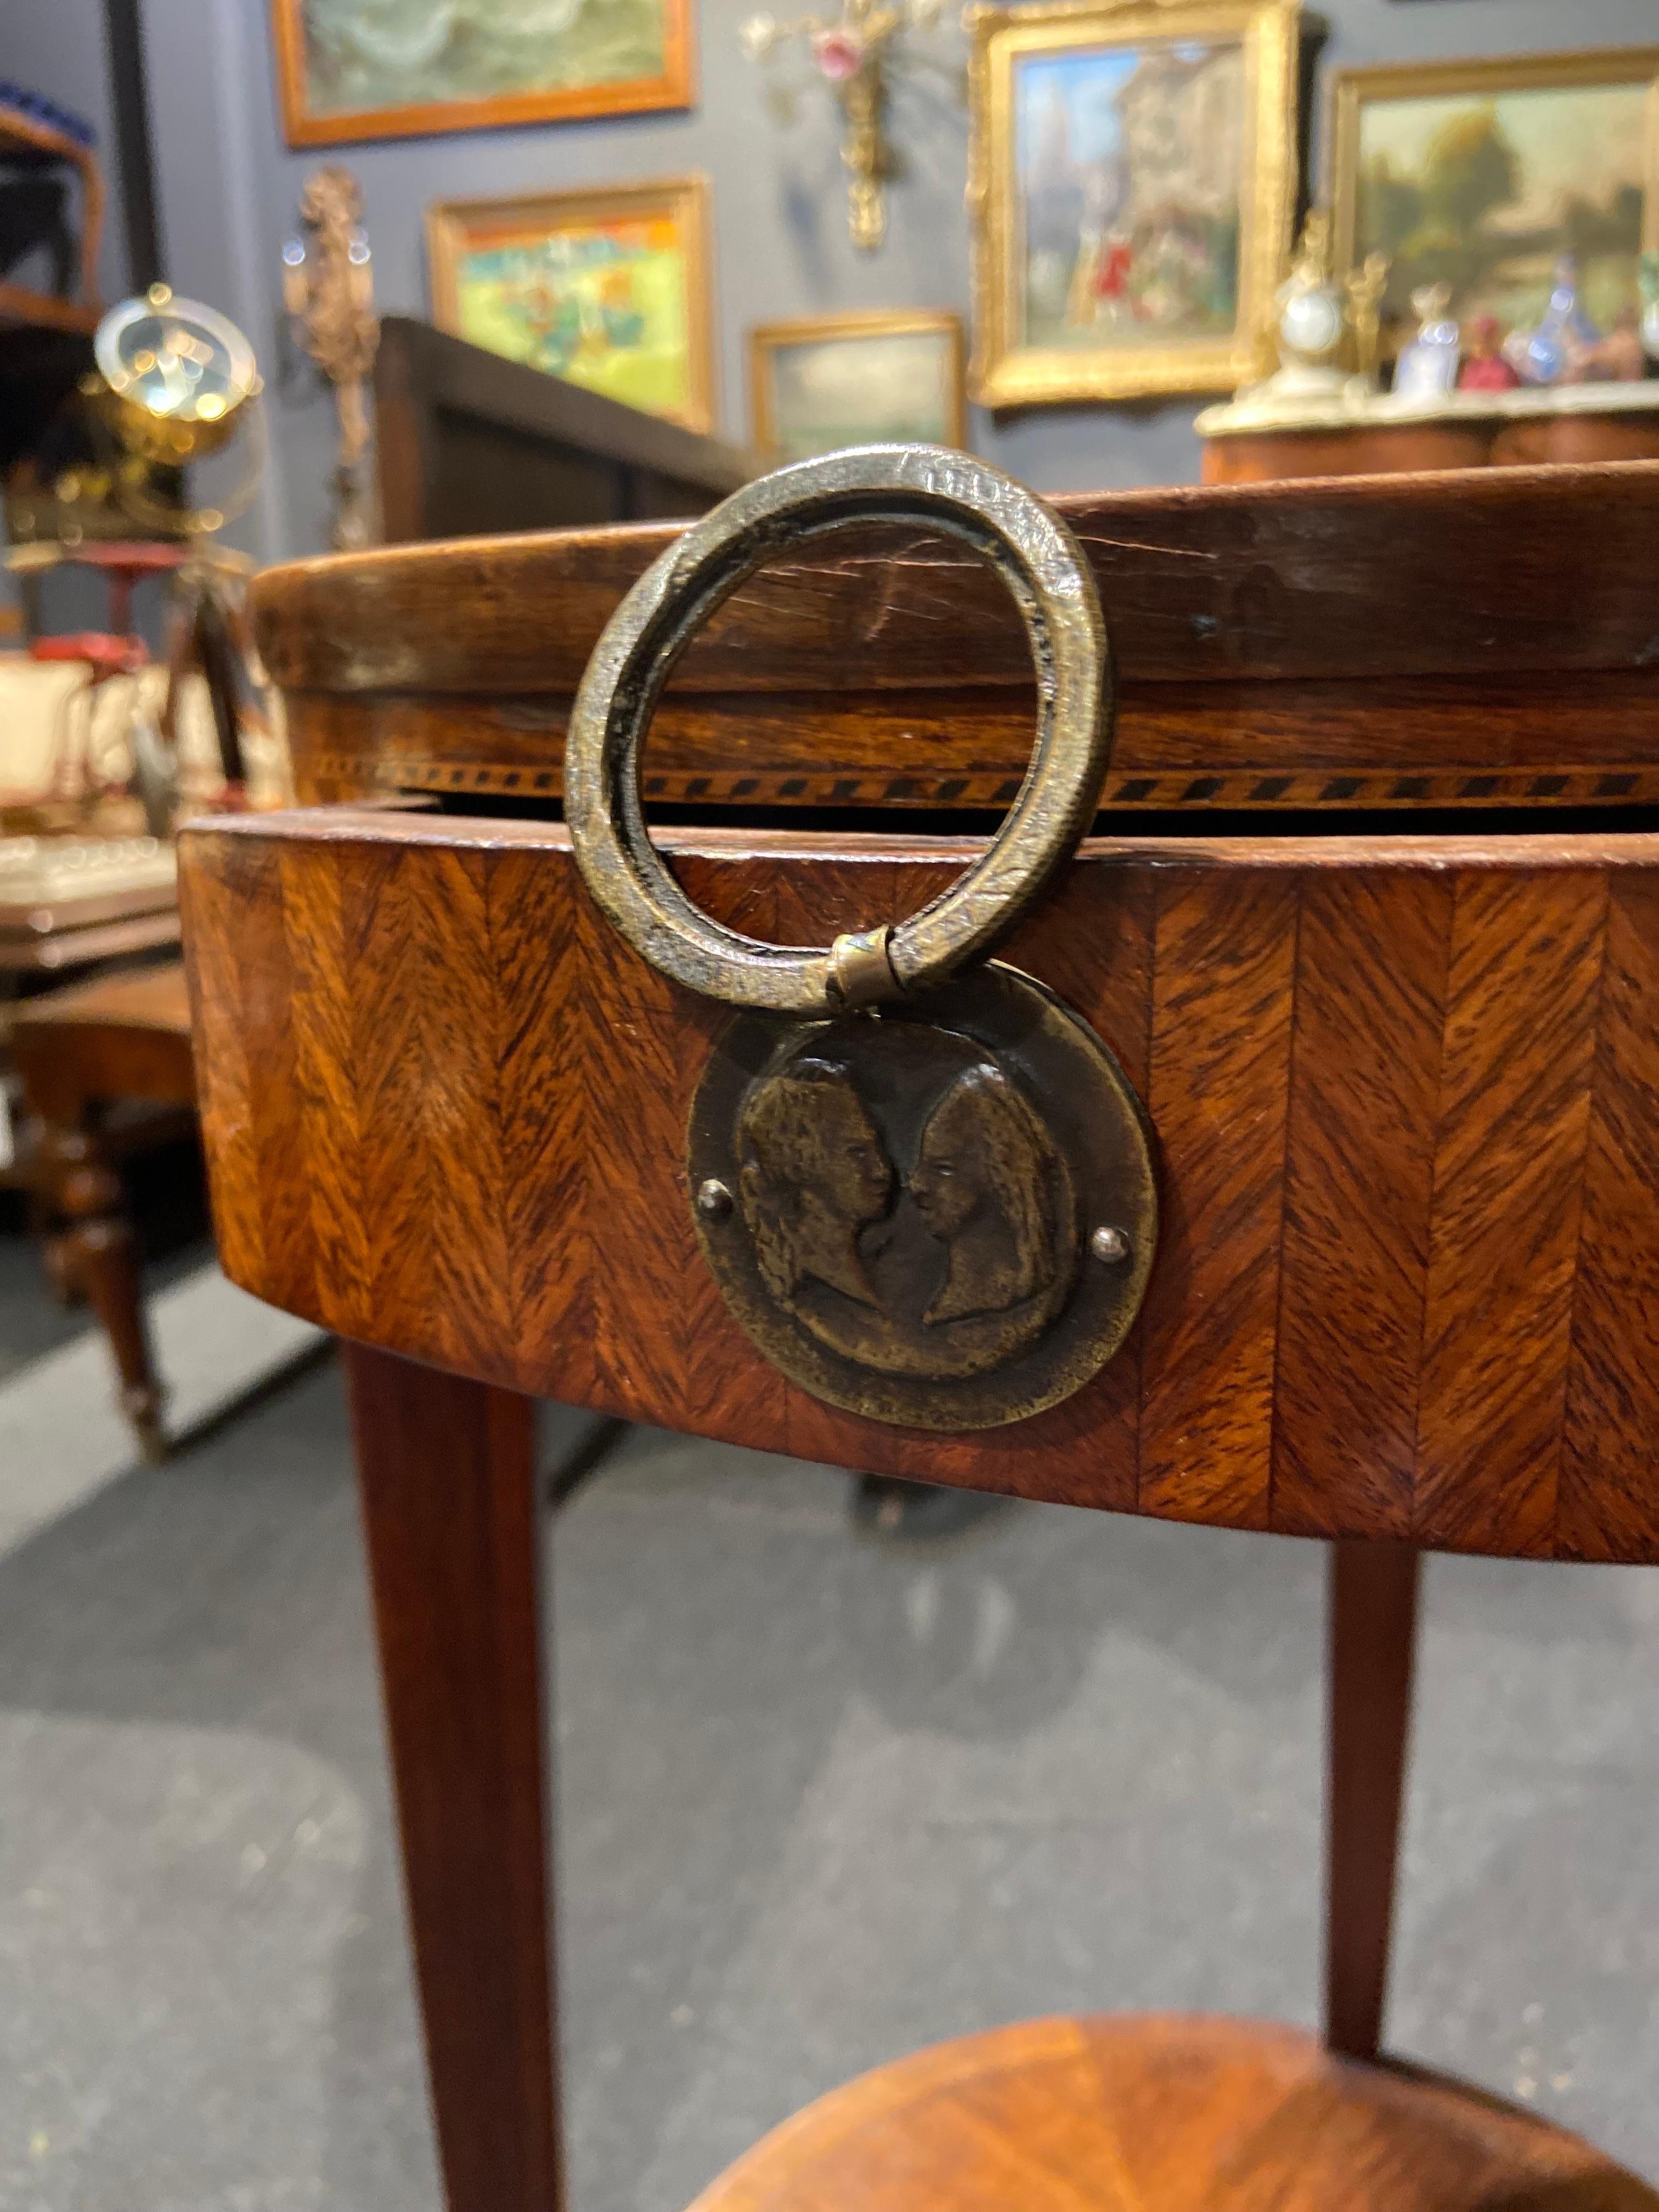 Beautiful French mahogany inlaid round side table in Louis XVI style made in late 19th Century. There is one front drawer and a lower shelf. The piece is inlaid on the top and all around and is in quite good condition having in mind the age and